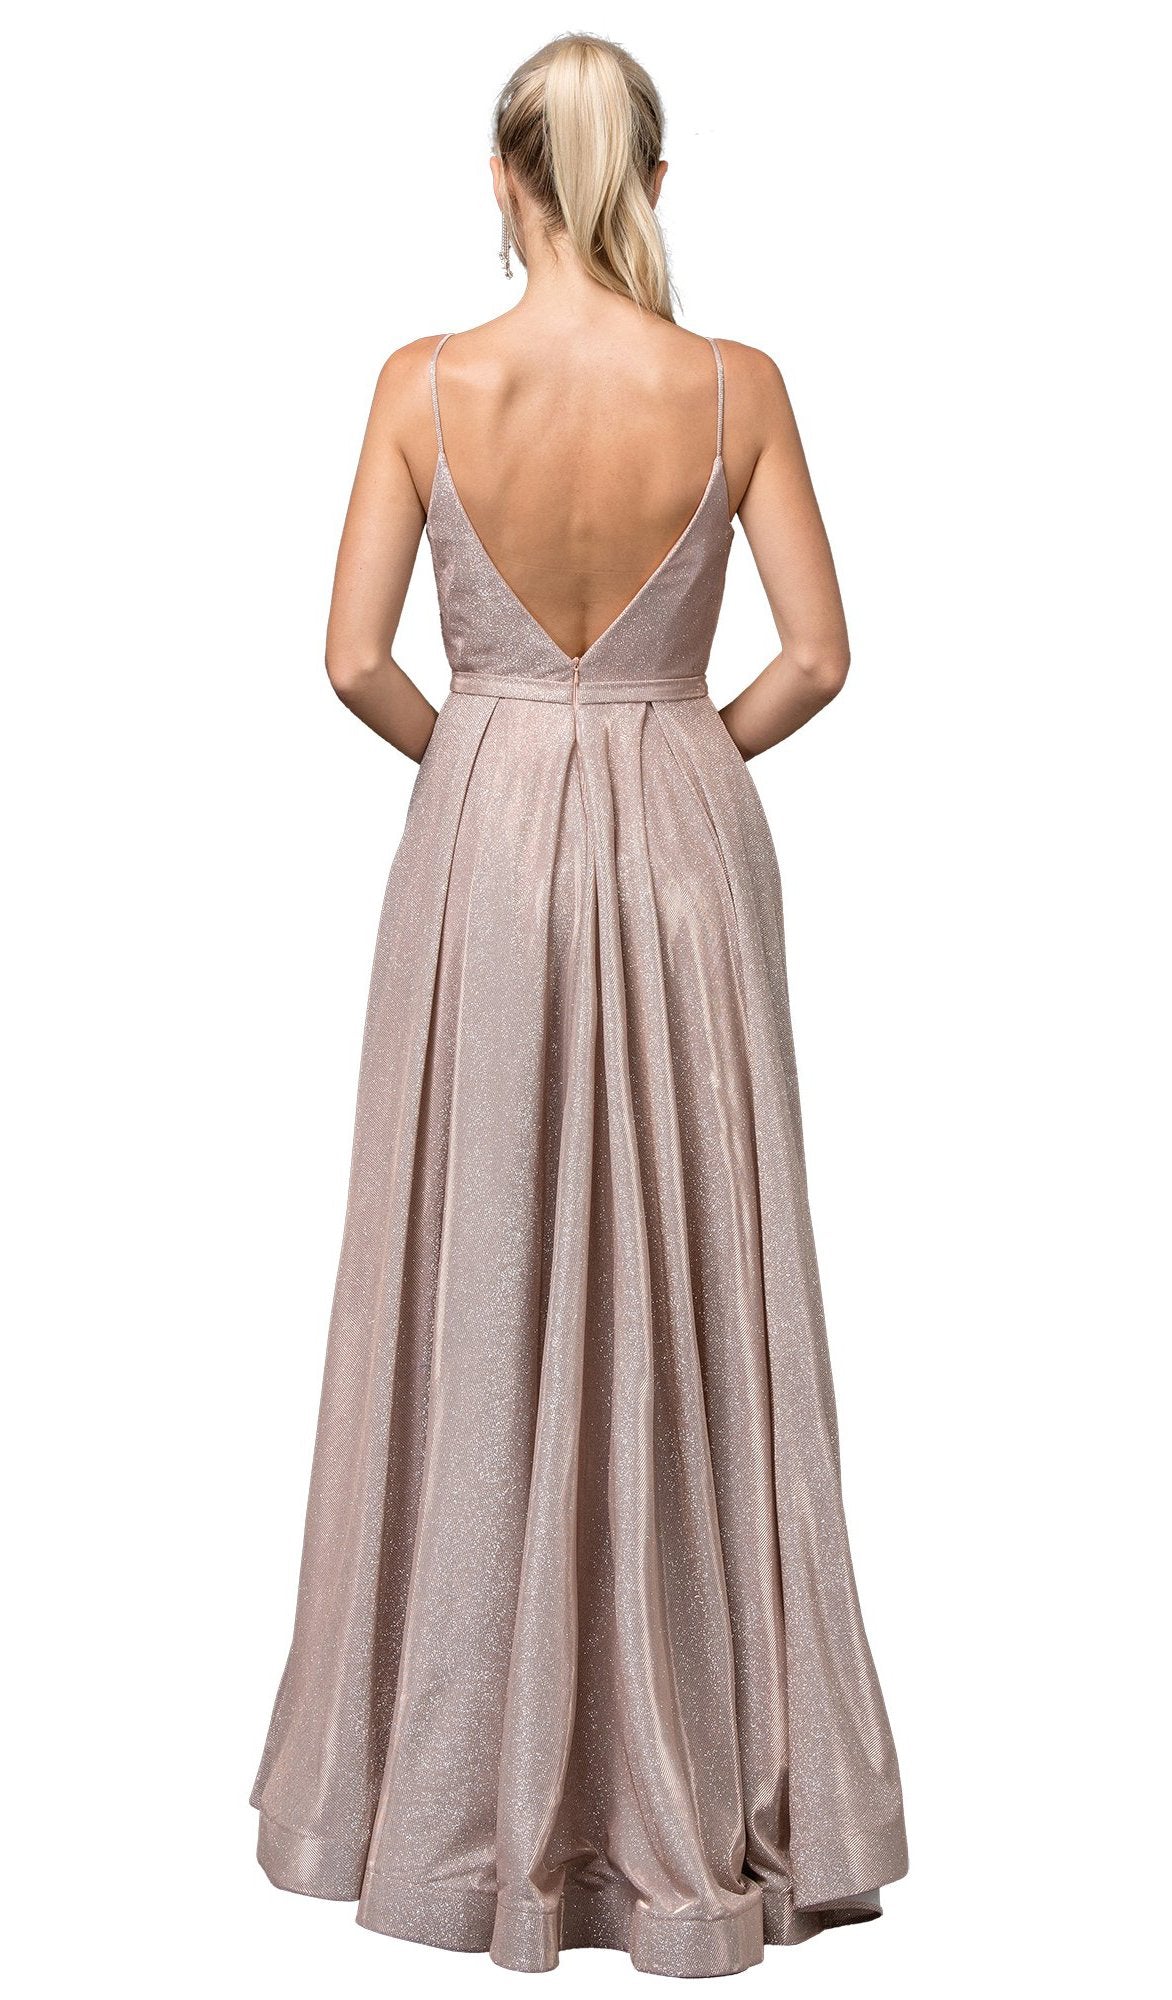 Dancing Queen - 2867 Sleeveless Plunging V-neck A-line Gown In Pink